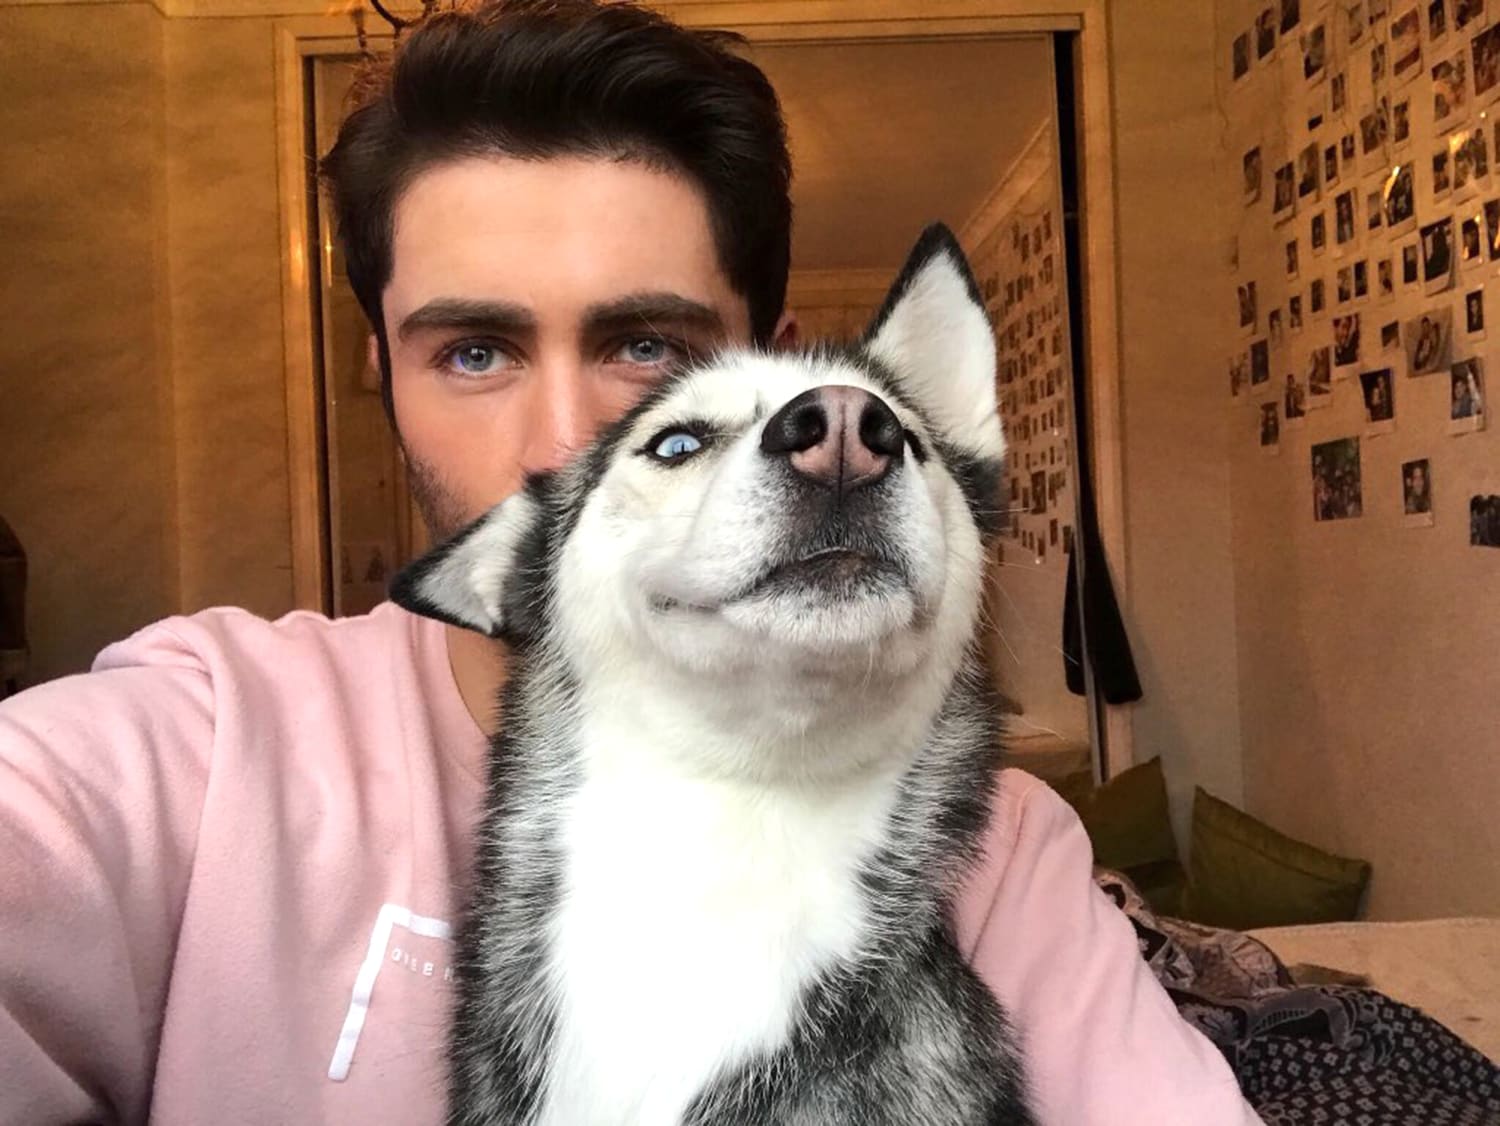 Man and husky's twinning photos go viral, inspire pet owners